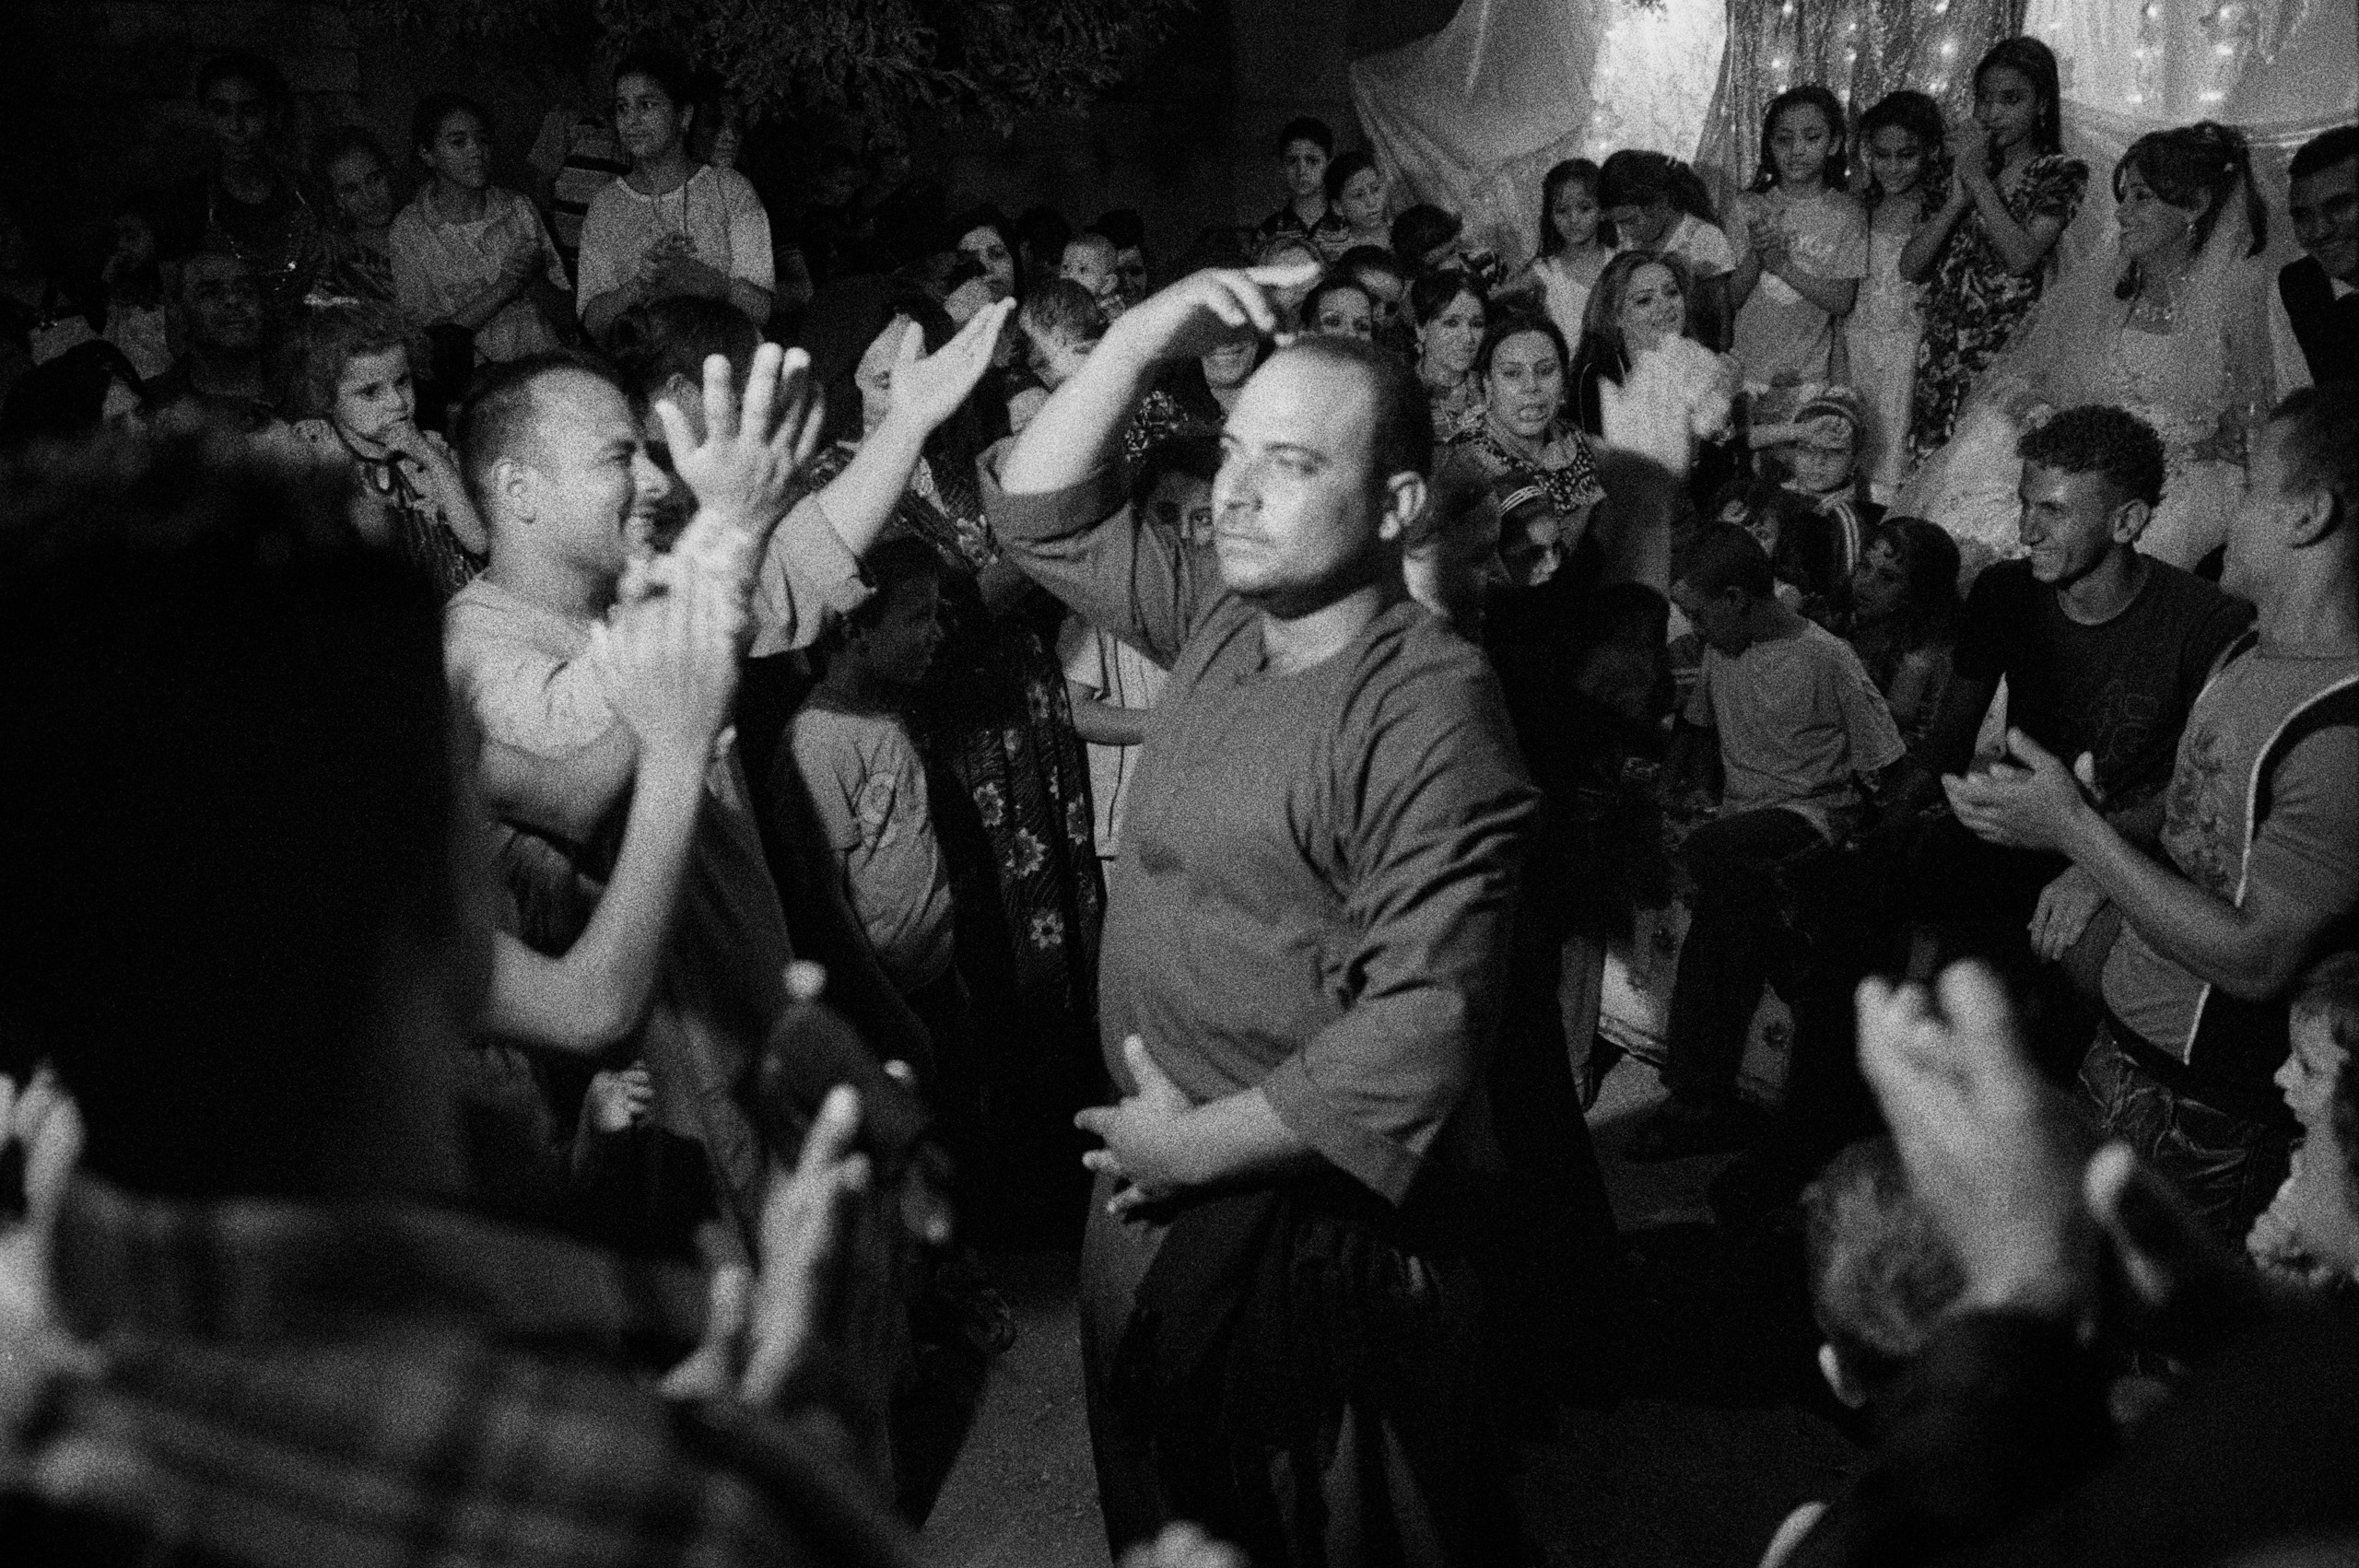 Deir Abu Hennis, Egypt. Dancing in front of the bride's house. August 2011.